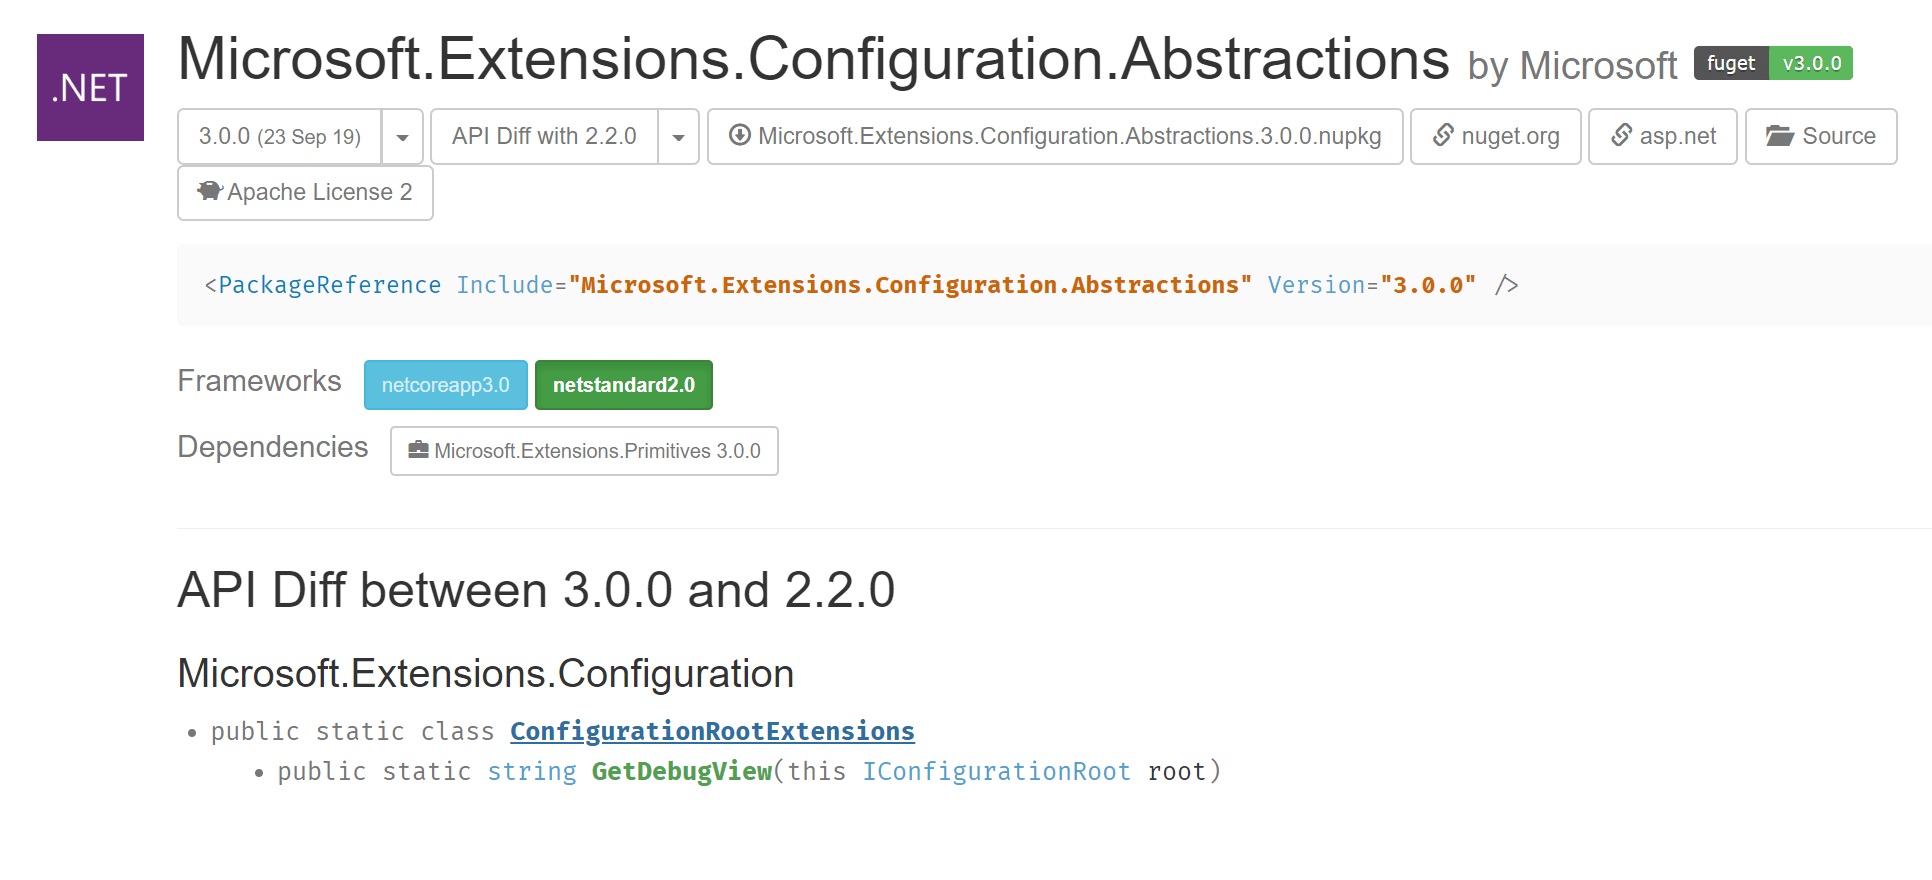 Comparison of Microsoft.Extensions.Configuration.Abstractions versions using fuget.org